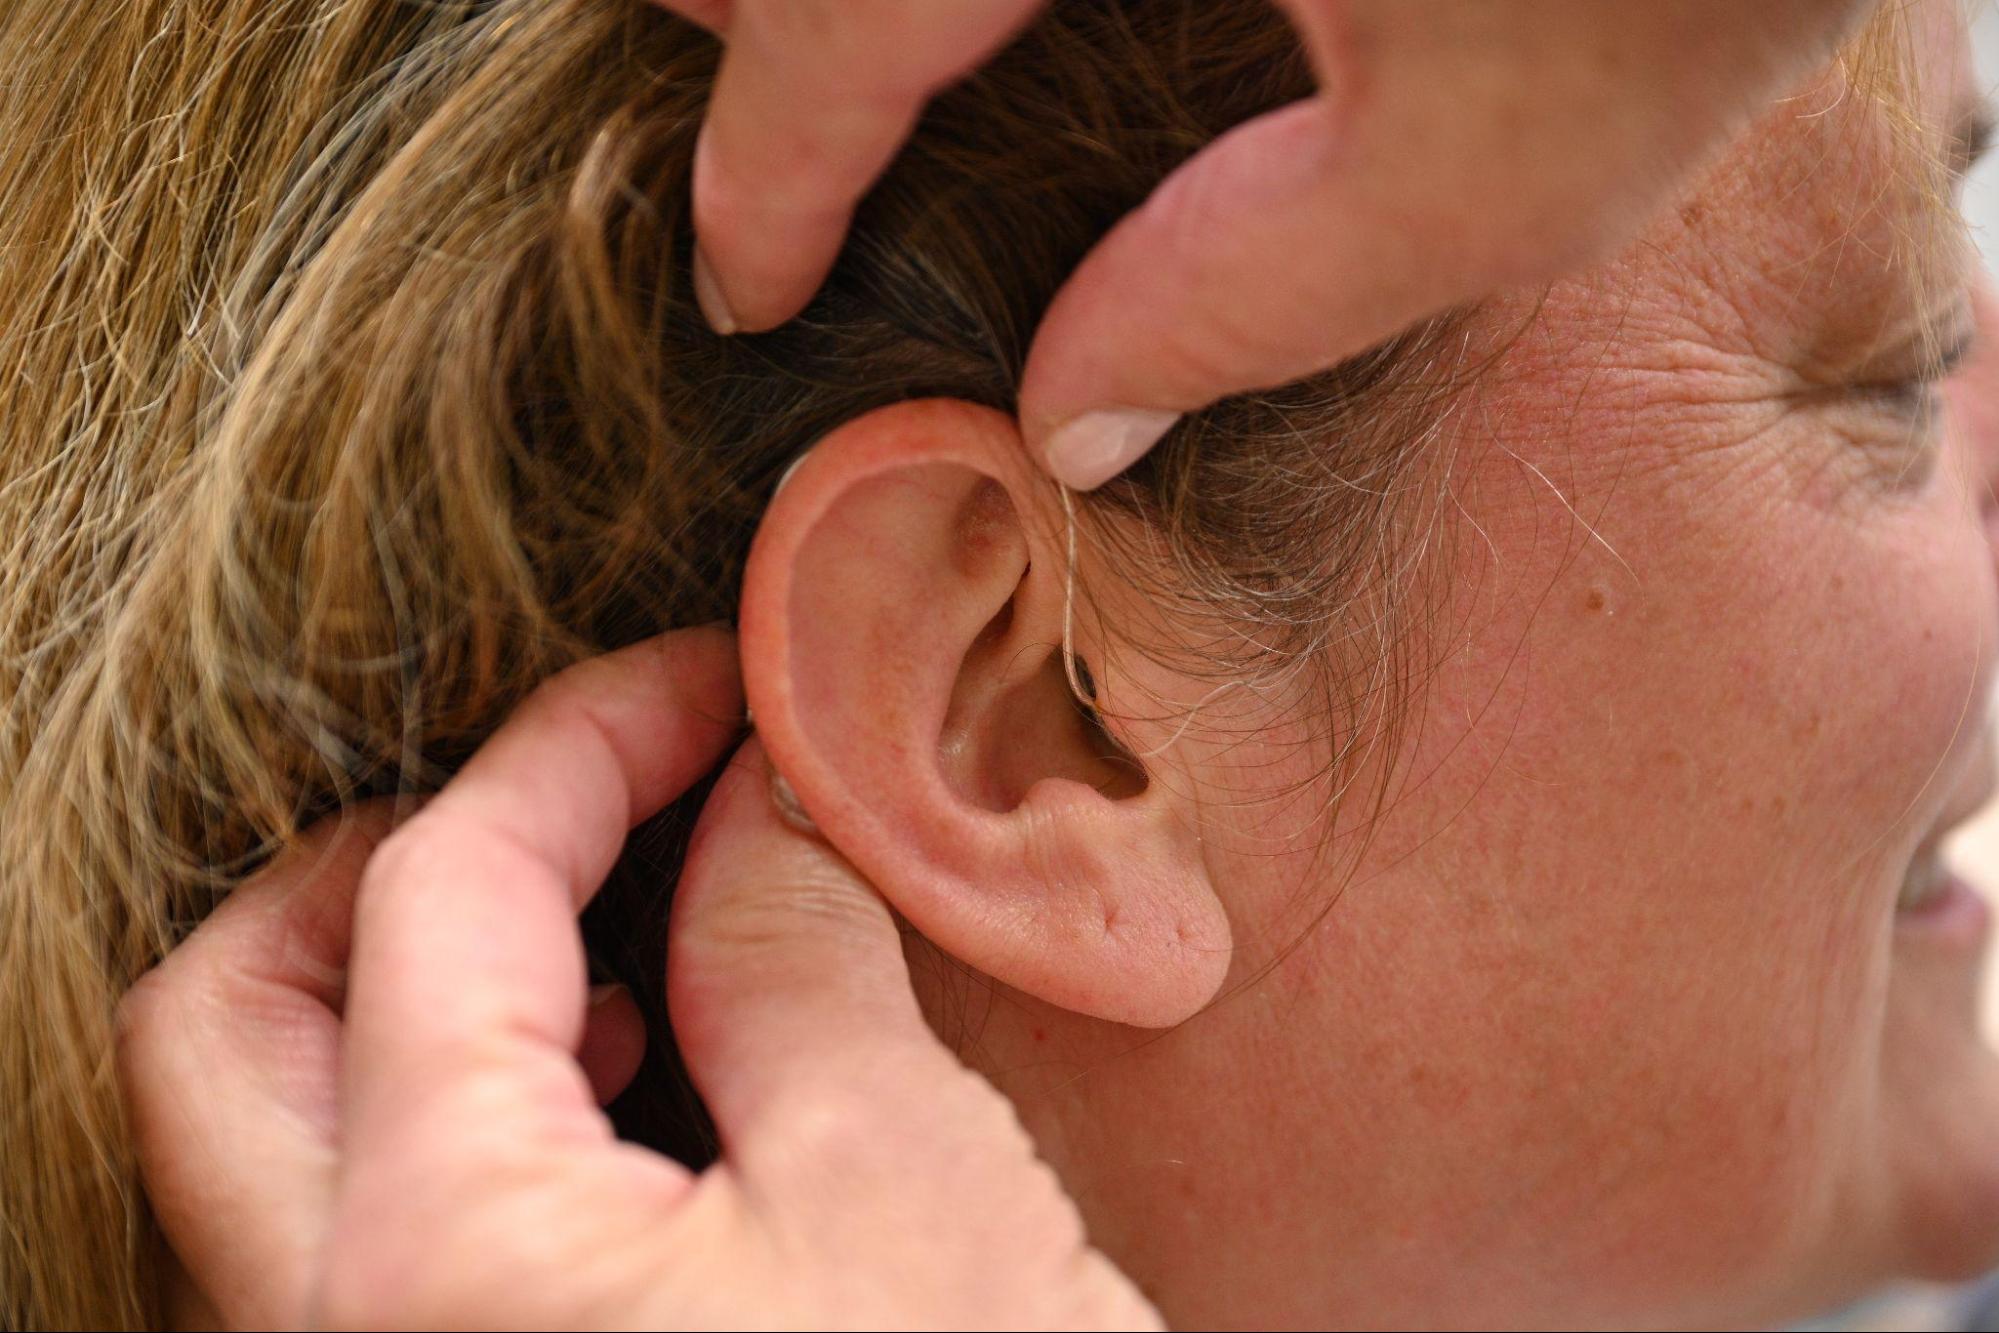 Figure 3. A close-up photograph of a woman's ear. Another person's hands are in frame holding back her hair and fitting the wire and mic of a hearing aid behind her ear.